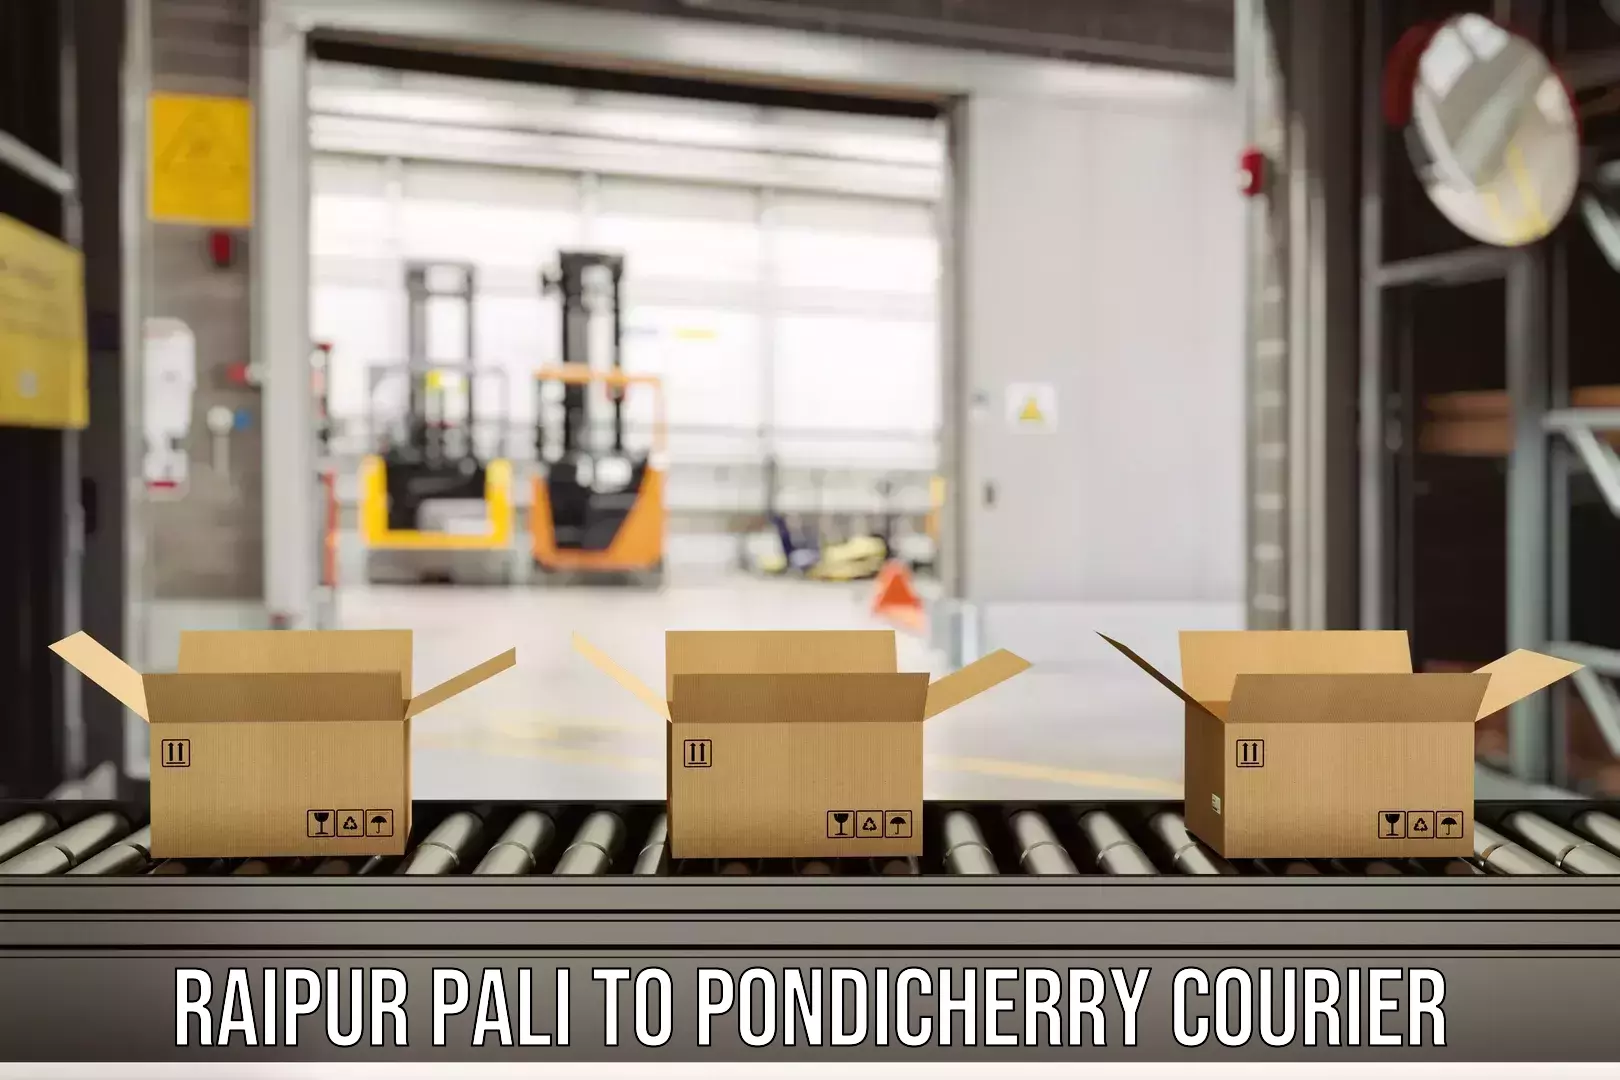 End-to-end delivery Raipur Pali to Pondicherry